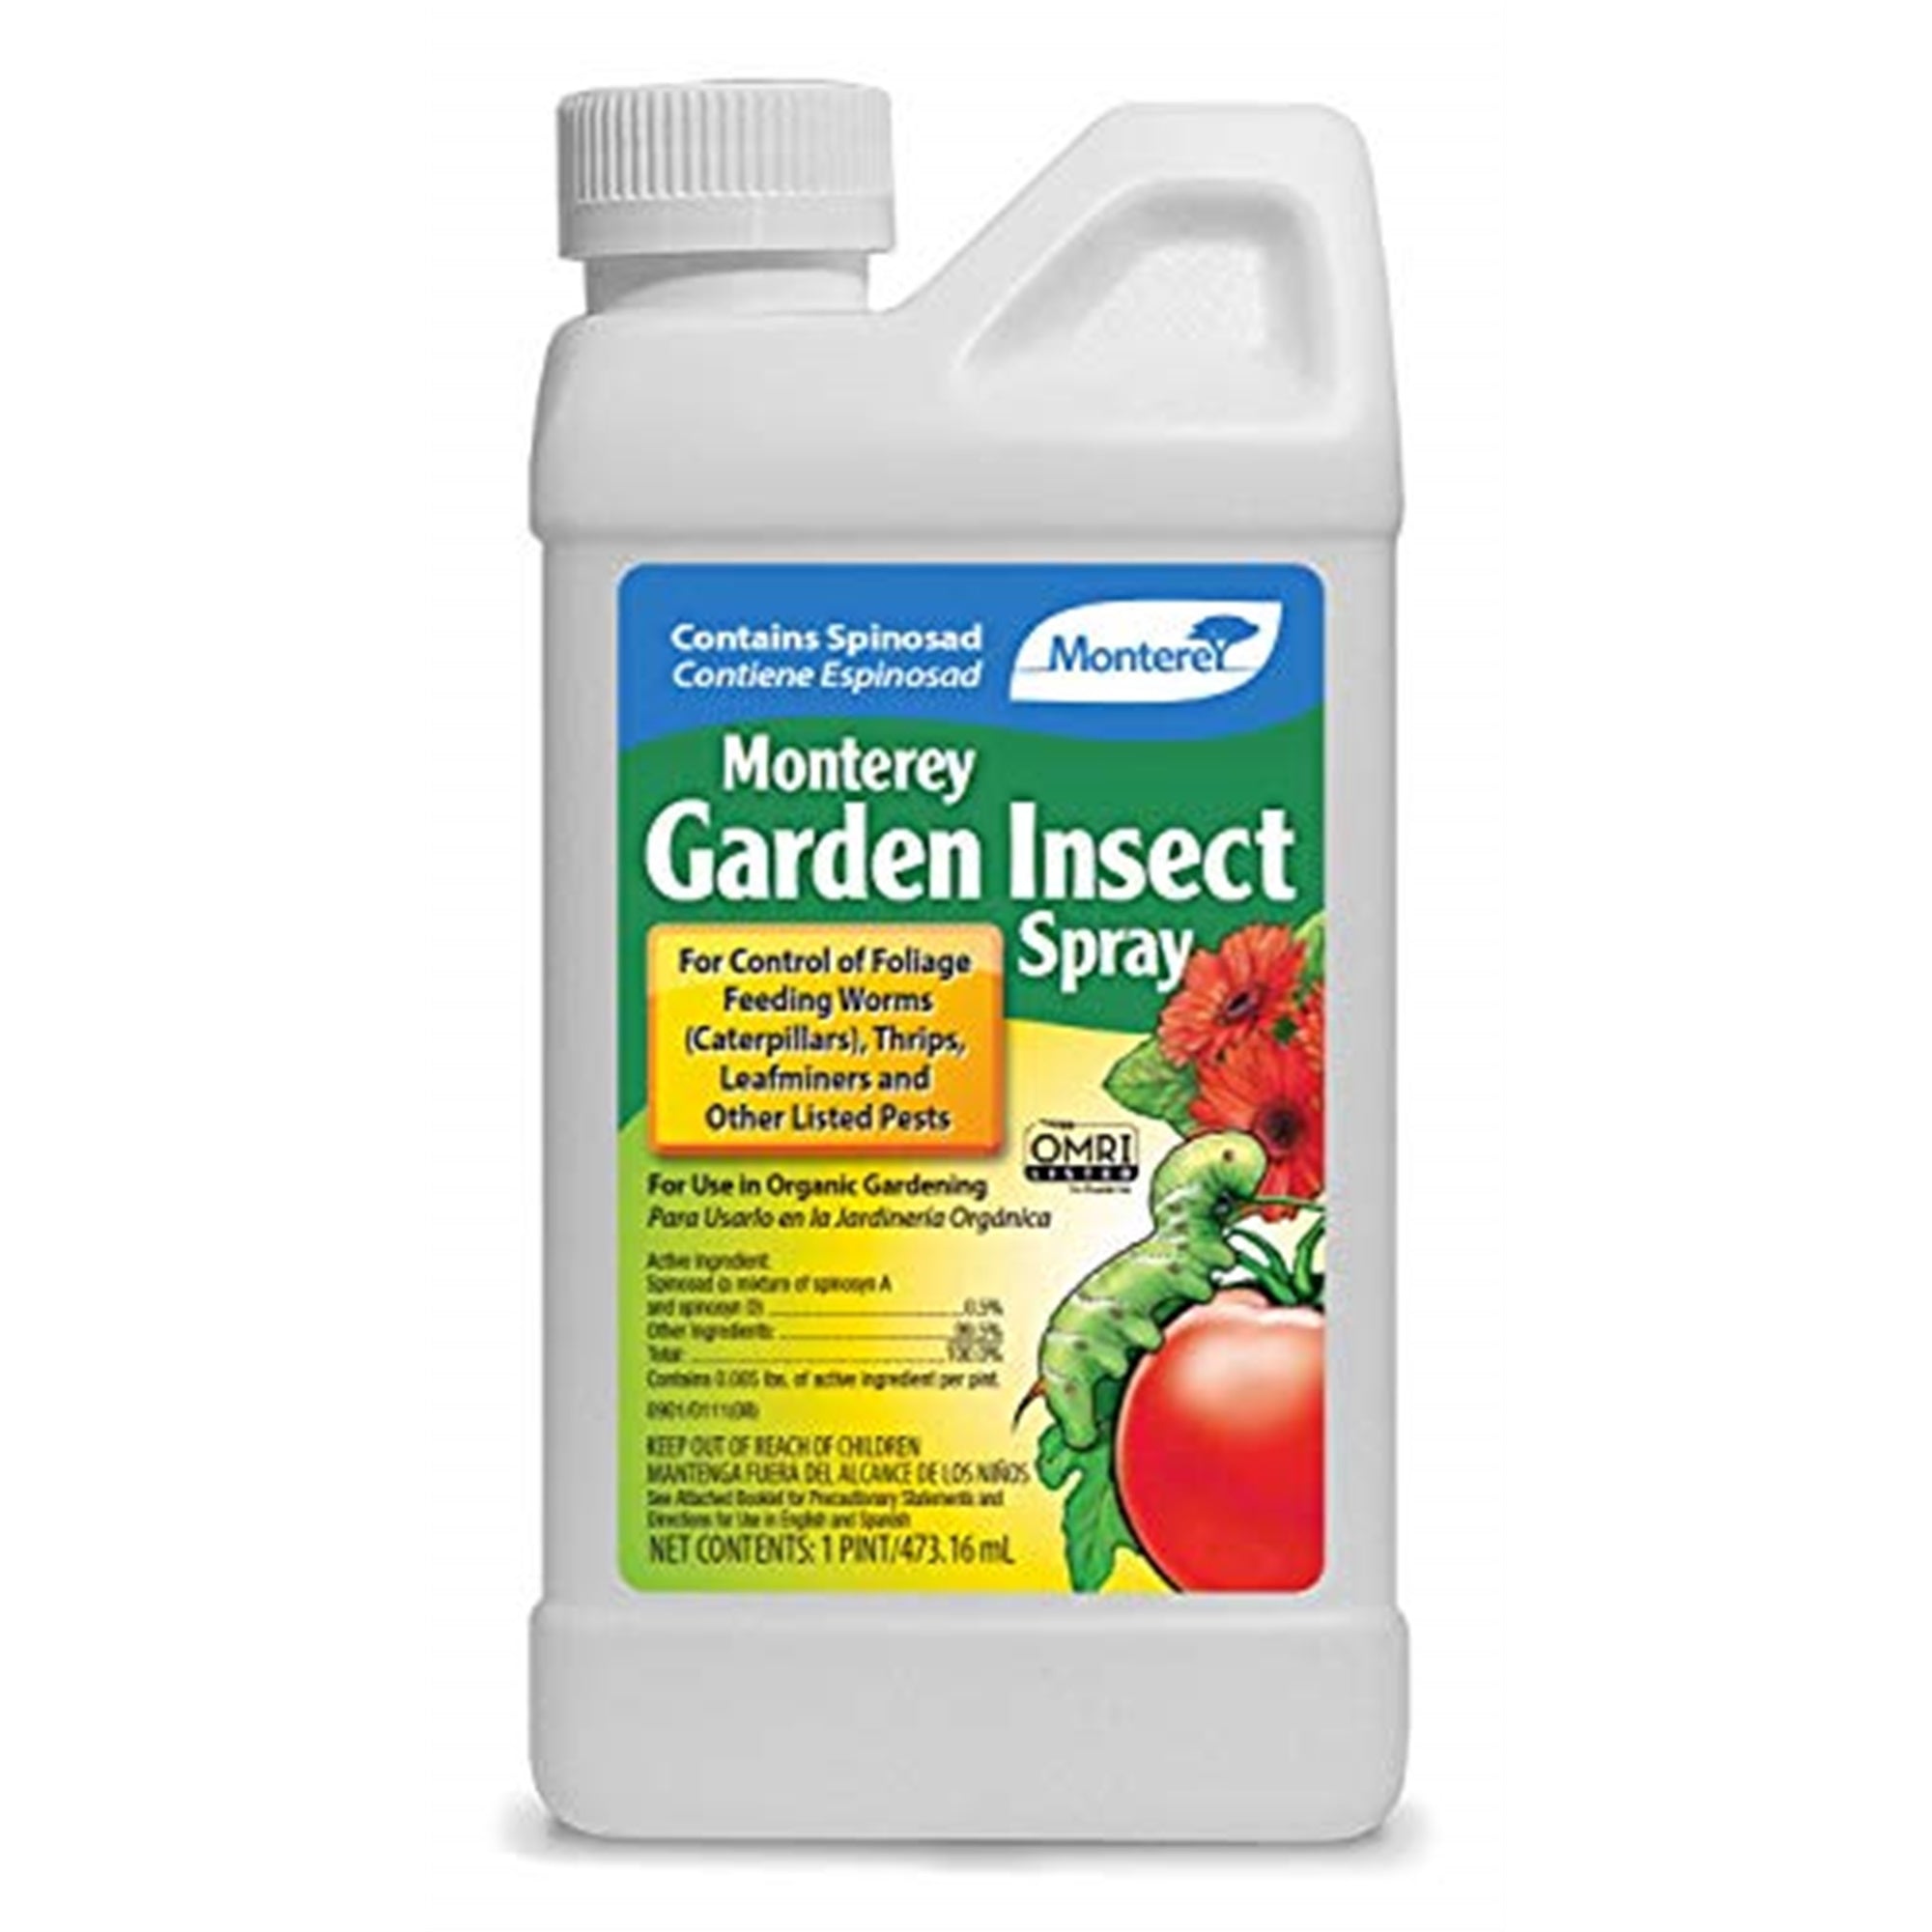 MontereyGarden Insect Spray, Concentrate, 16 Oz.